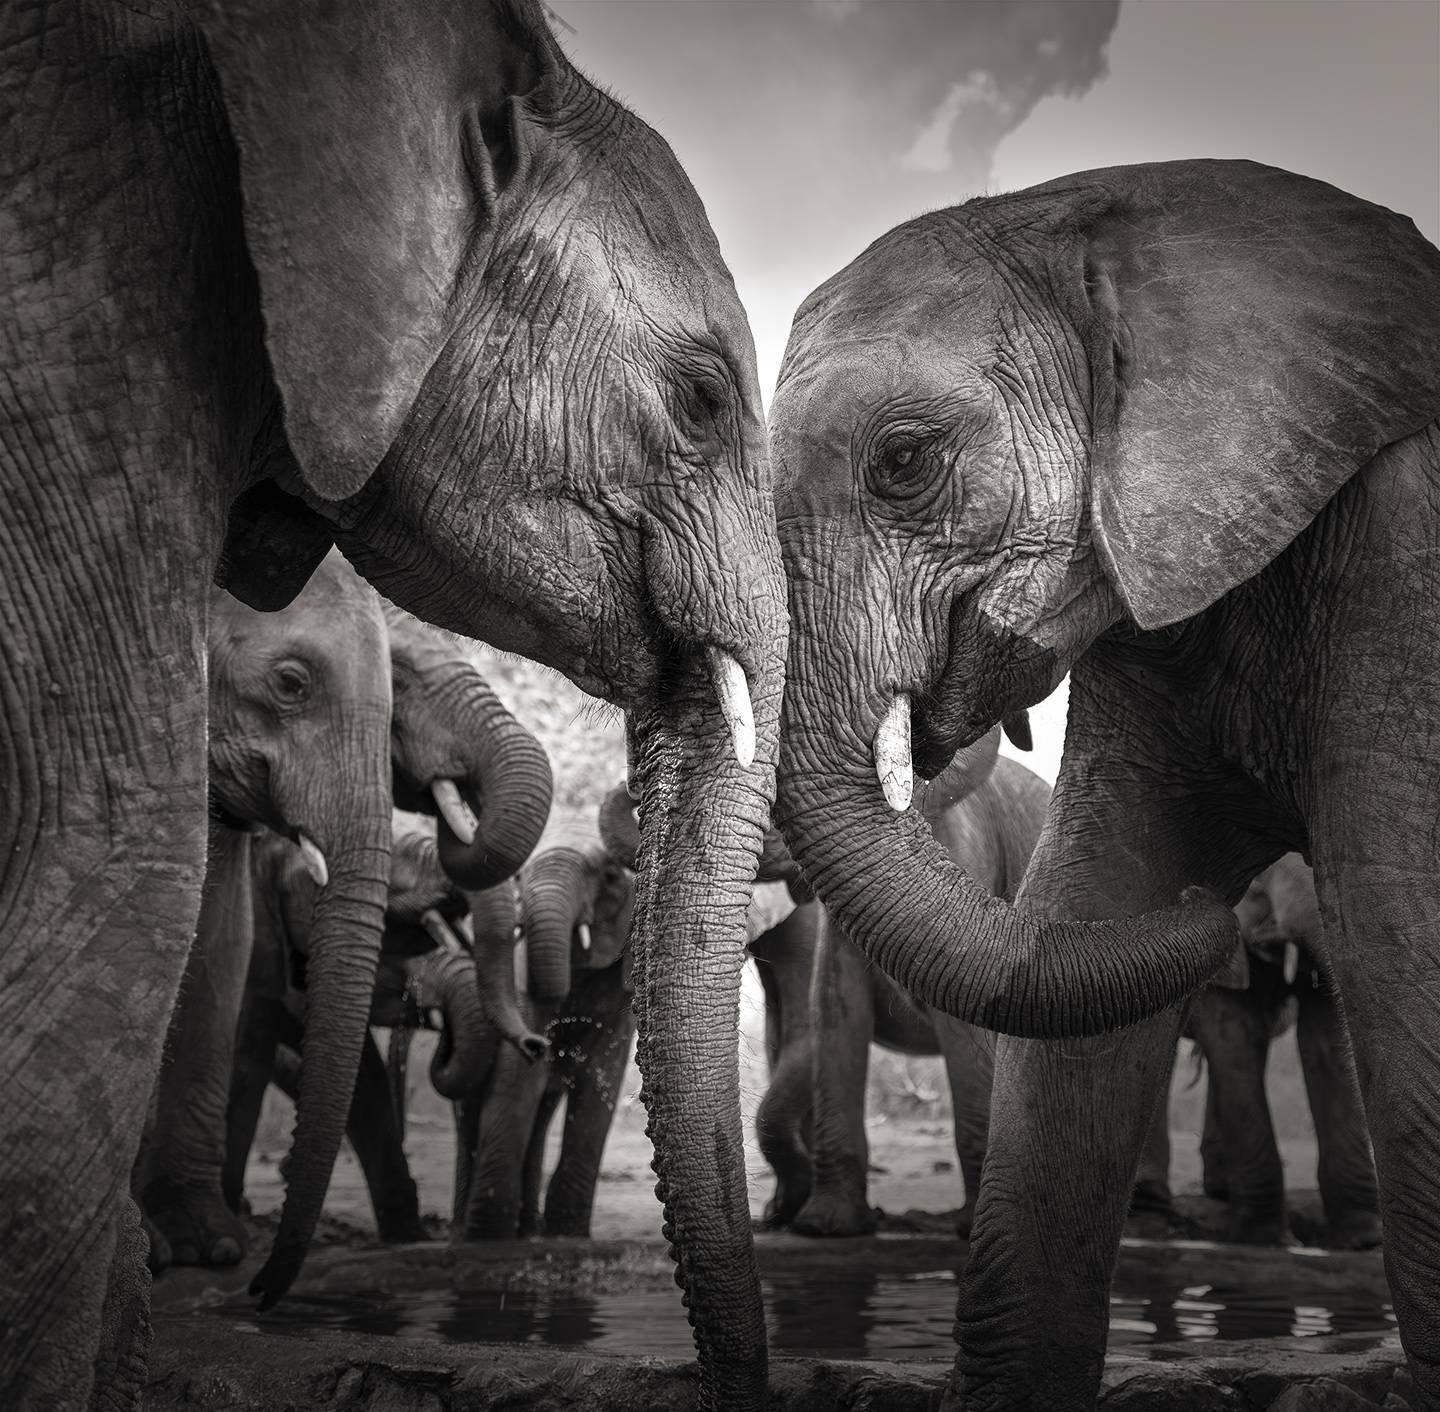 Joachim Schmeisser Black and White Photograph - At the waterhole II, animal, wildlife, black and white photography, elephant